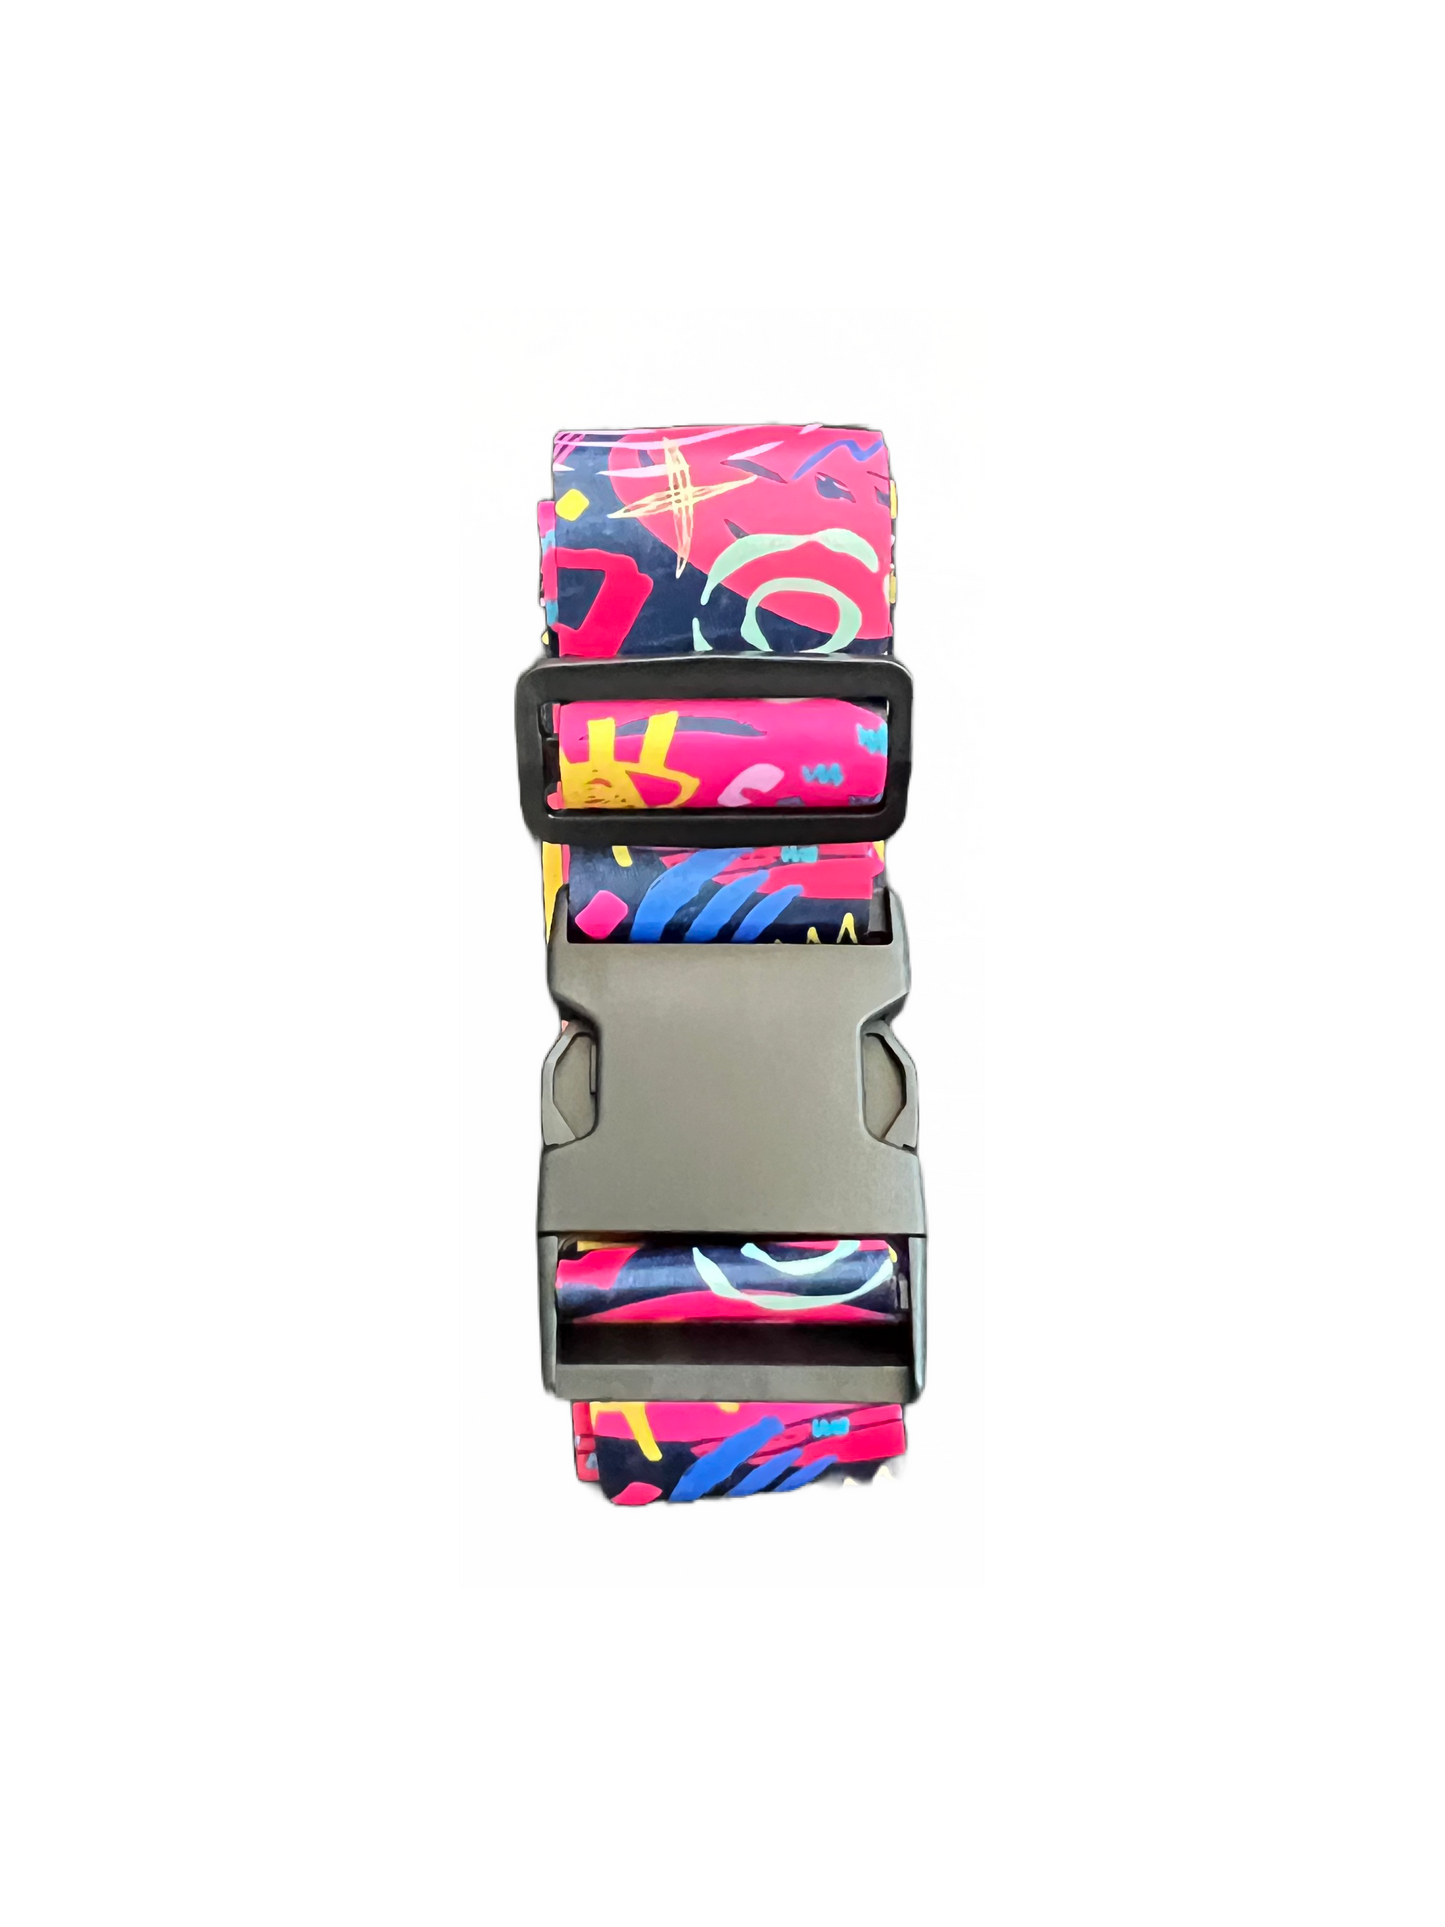 Luggage Strap (Approx. 40-80 inches)- Assorted Designs